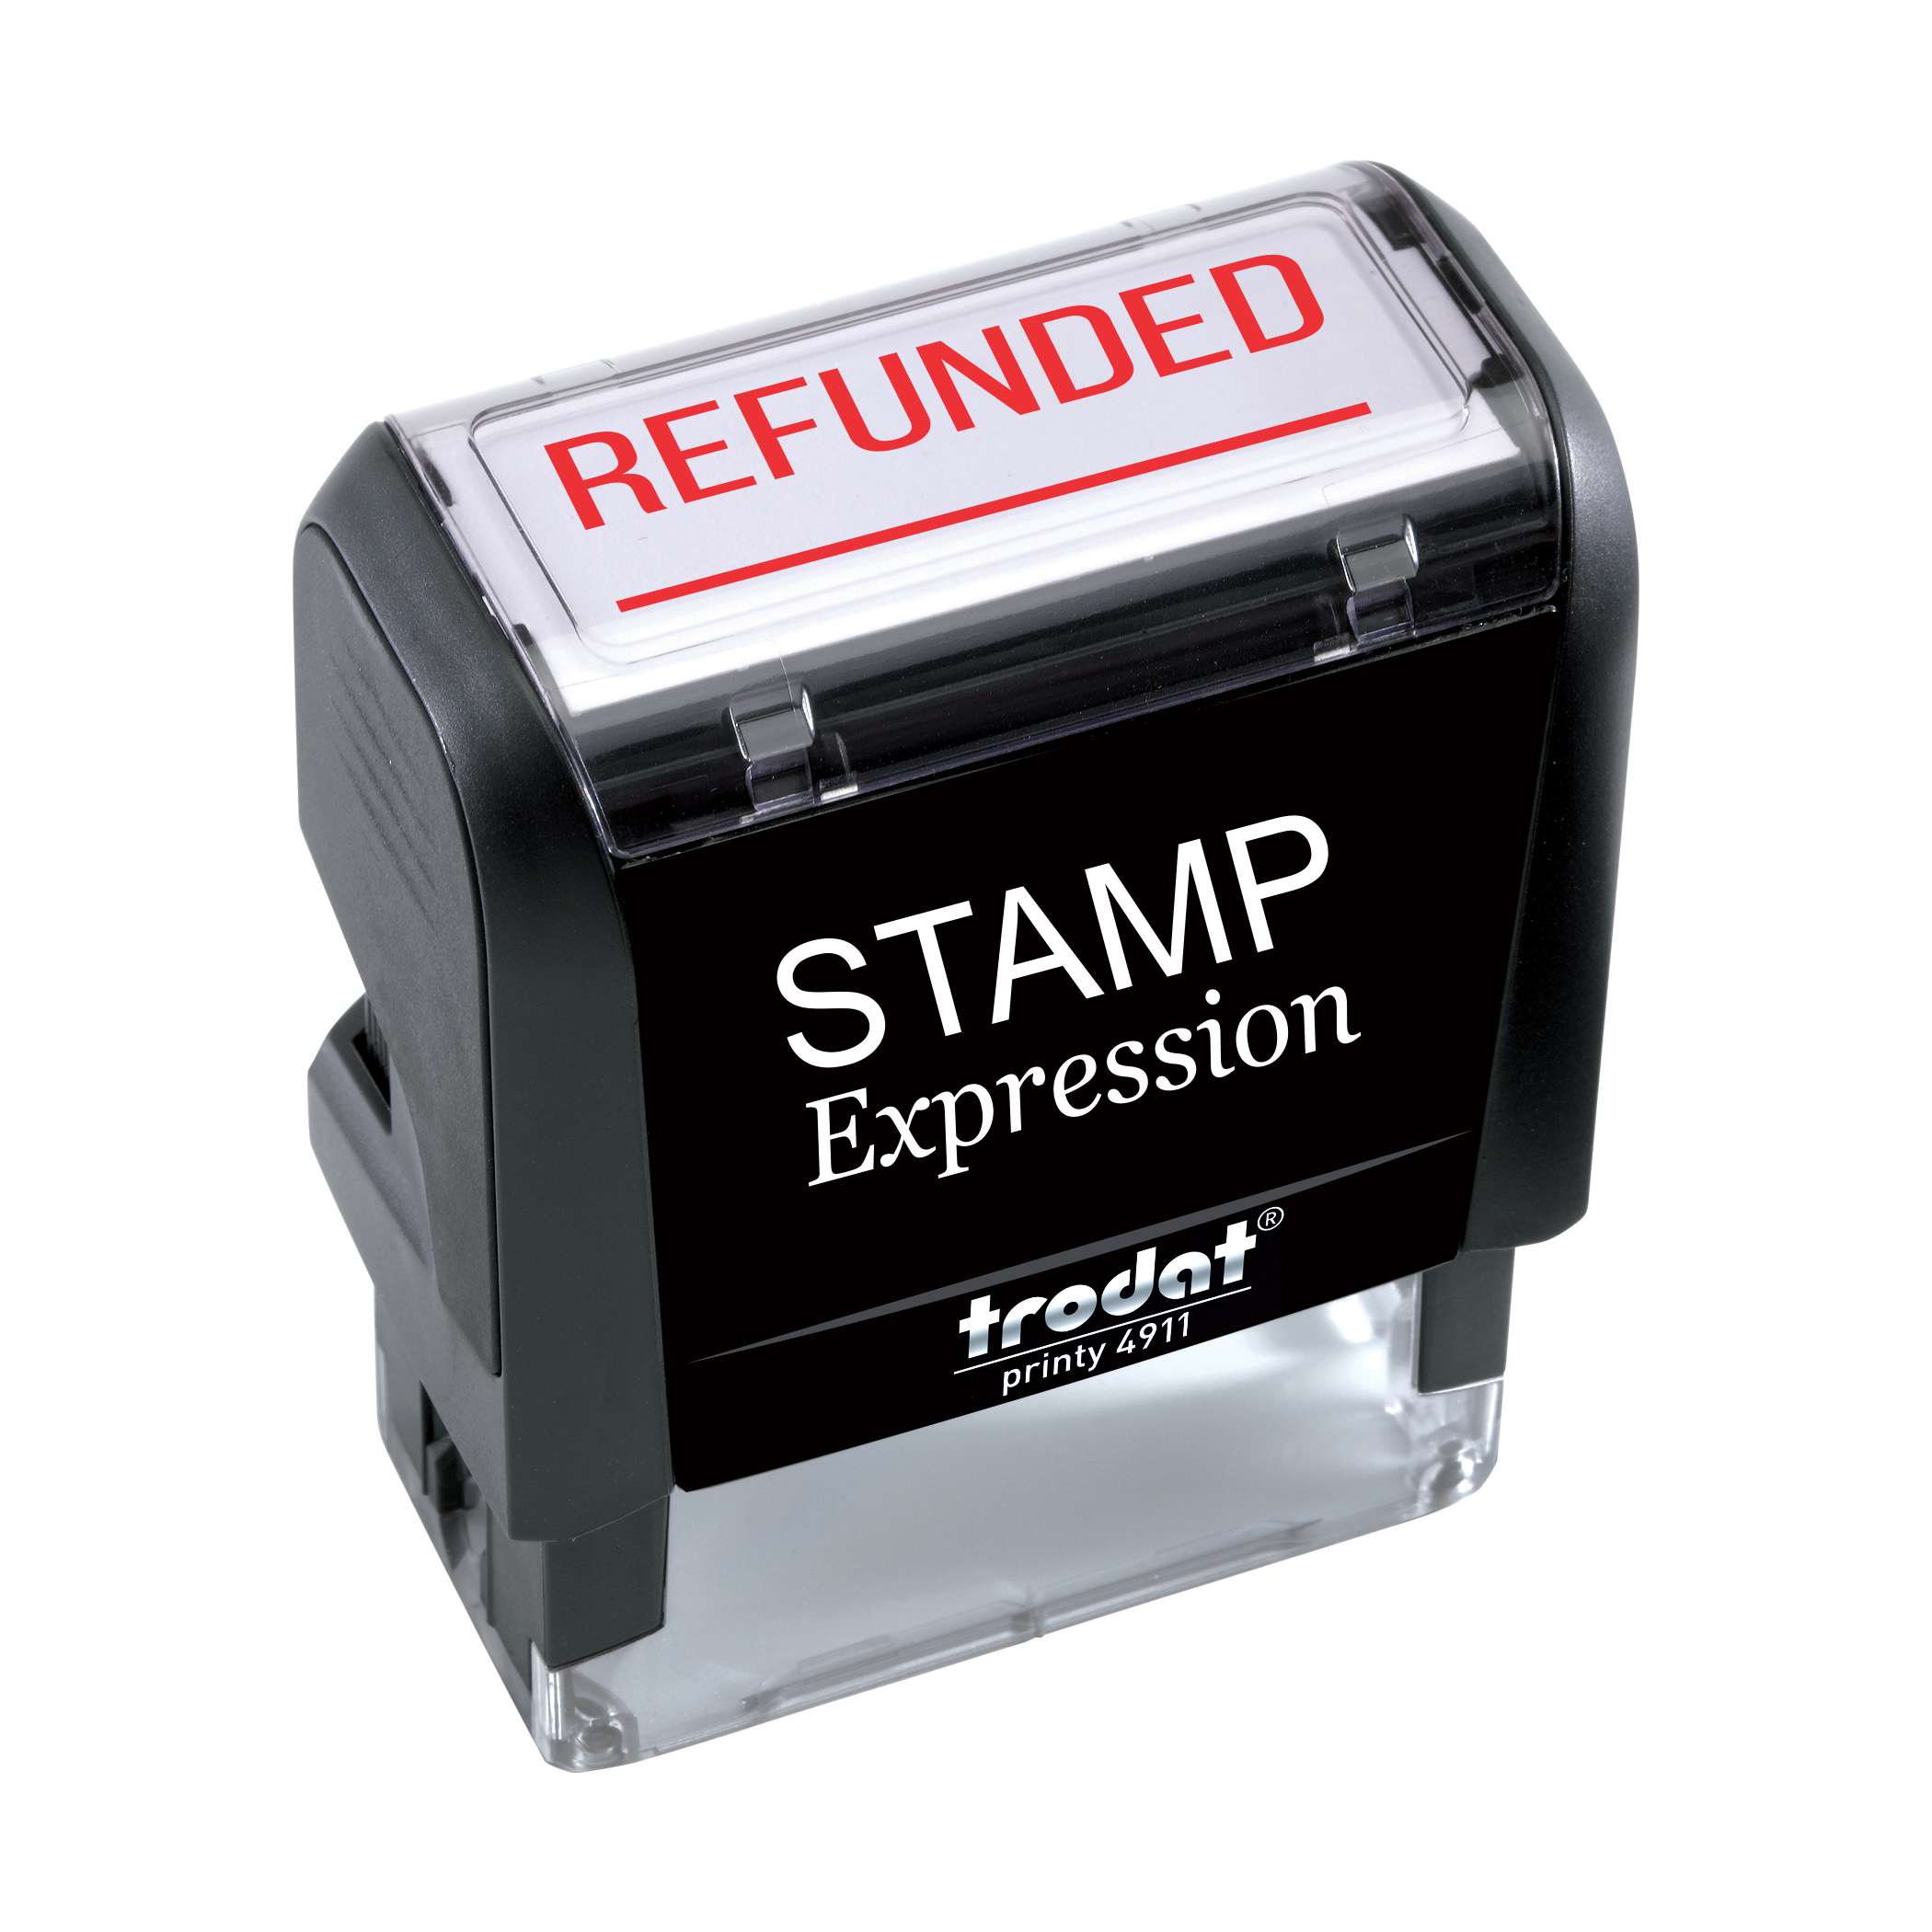 REFUNDED with line Office Self Inking Rubber Stamp